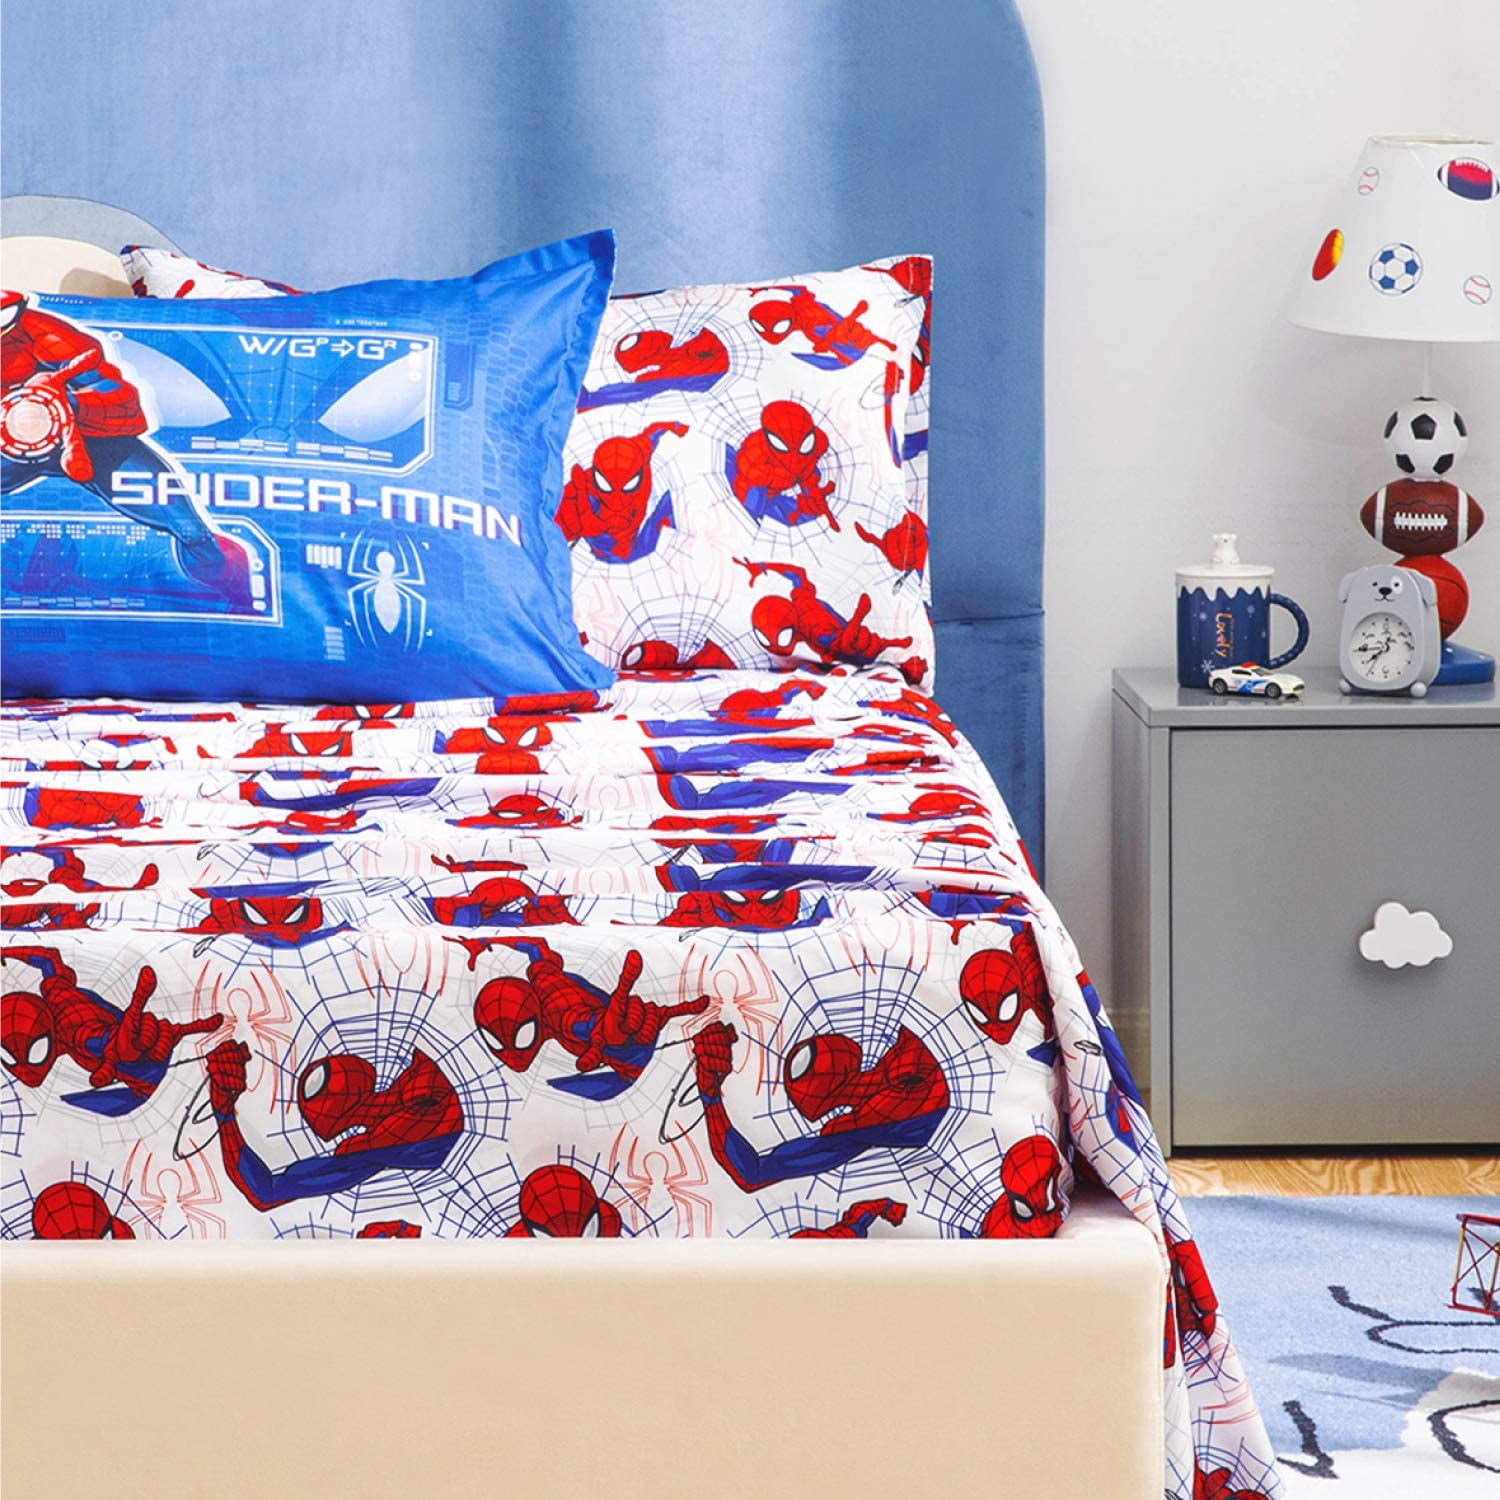 New Marvel Spiderman Twin Bed Sheet set for kids with Reversible Comforter-5pcs 